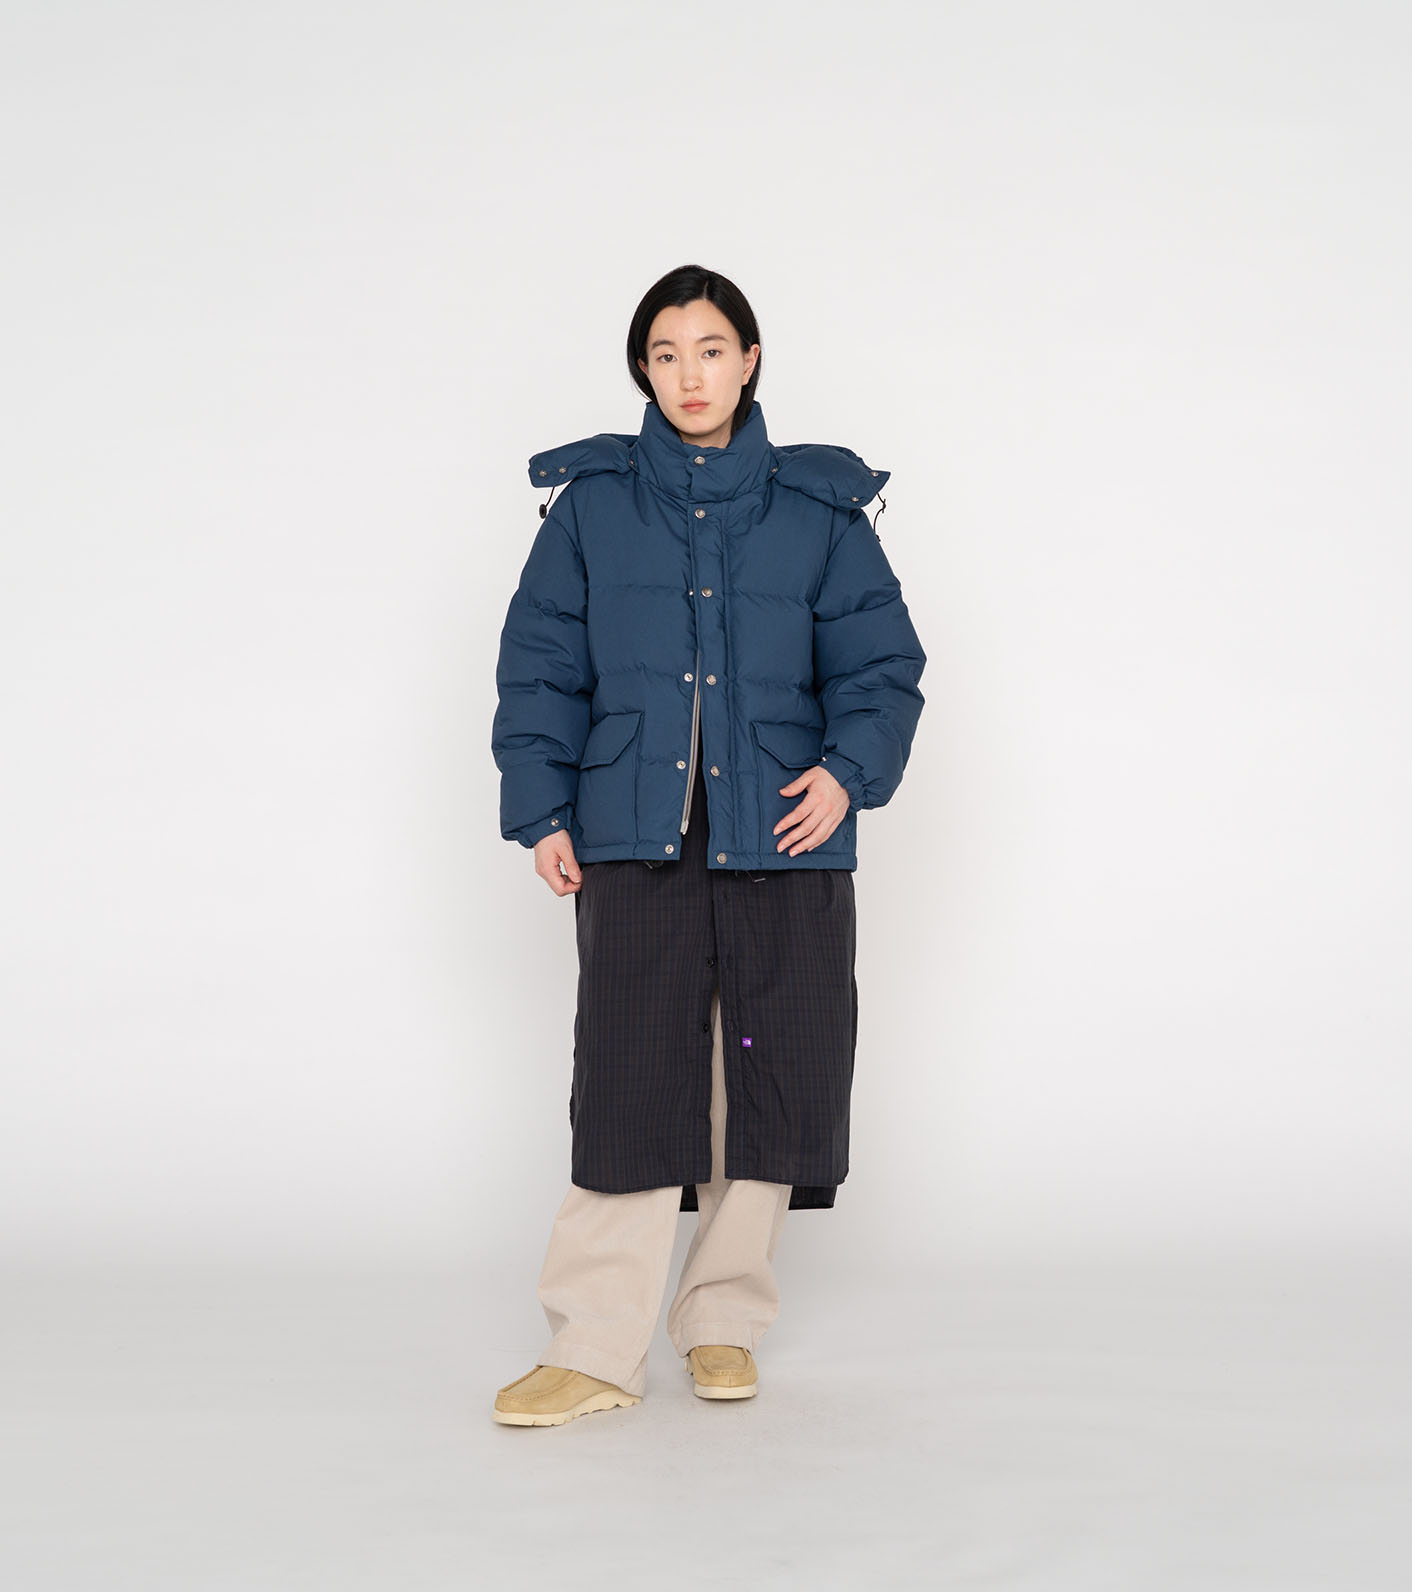 THE NORTH FACE Sierra parka